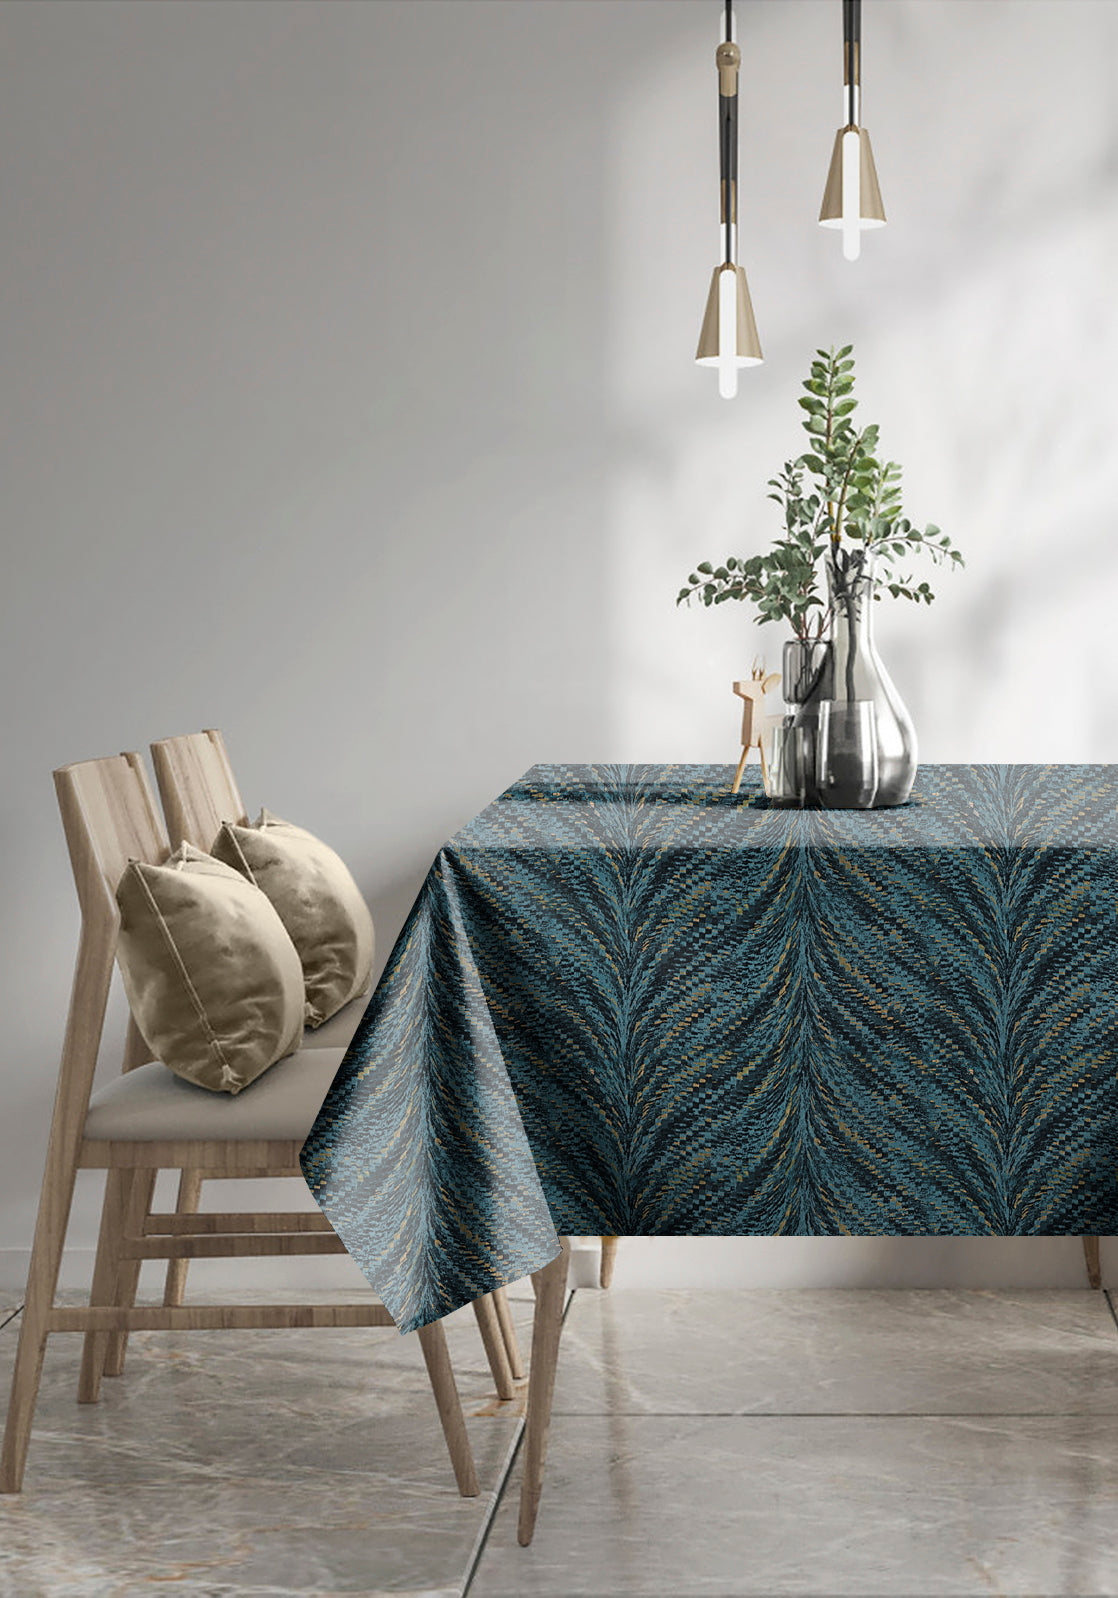 Luxor Teal 6 Seater Table Cloth